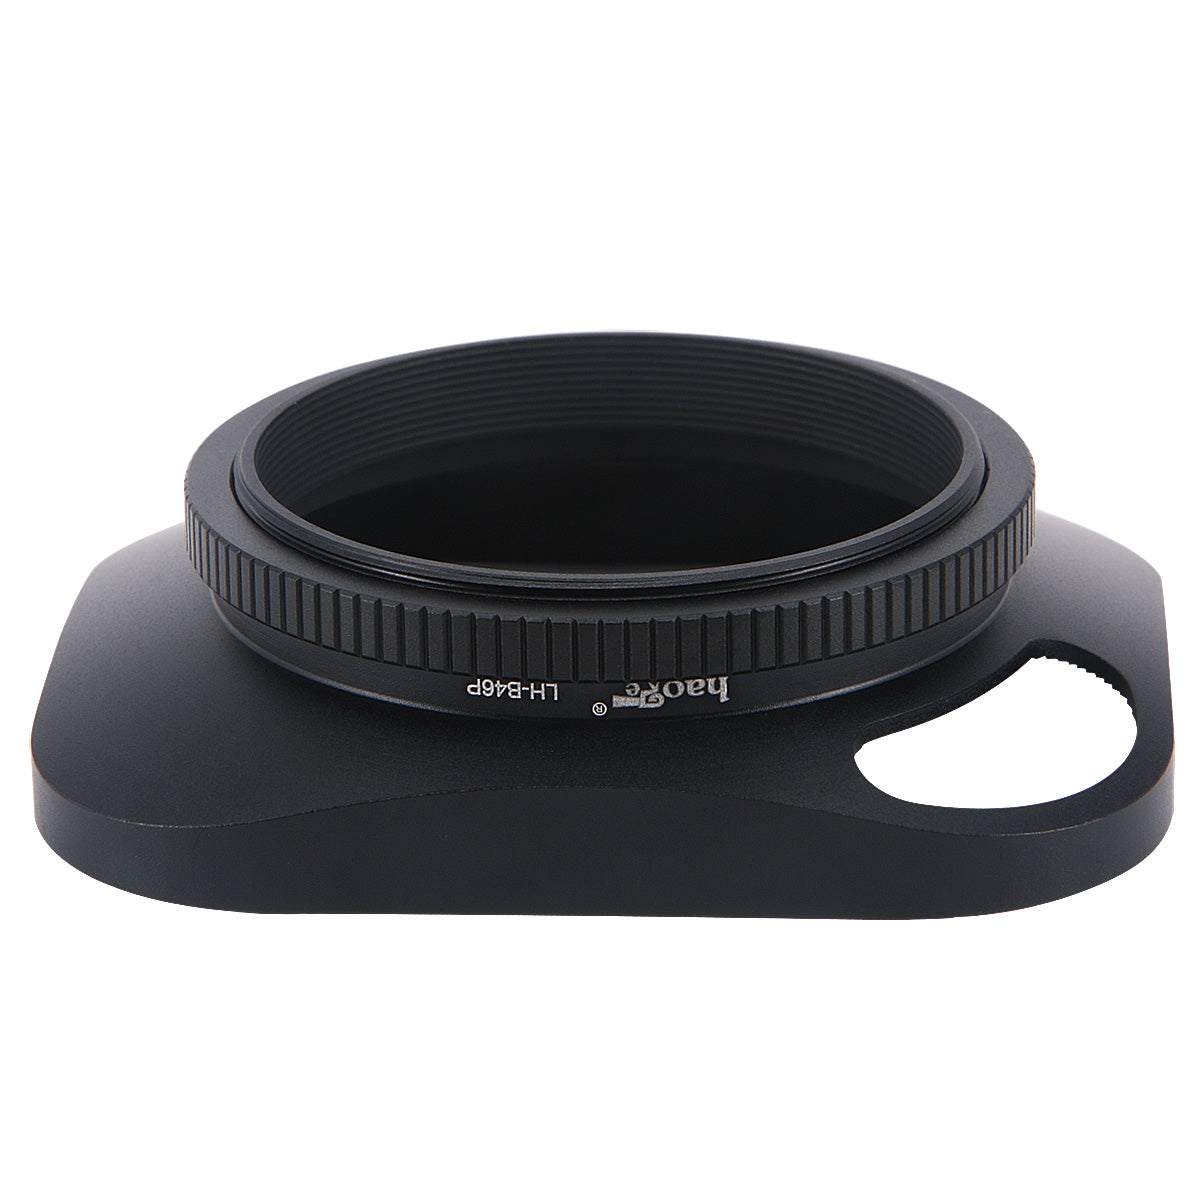 Haoge LH-B46P 46mm Square Metal Screw-in Lens Hood Hollow Out Designed with Cap for Leica Rangefinder Camera with 46mm E46 Filter Thread Lens Black